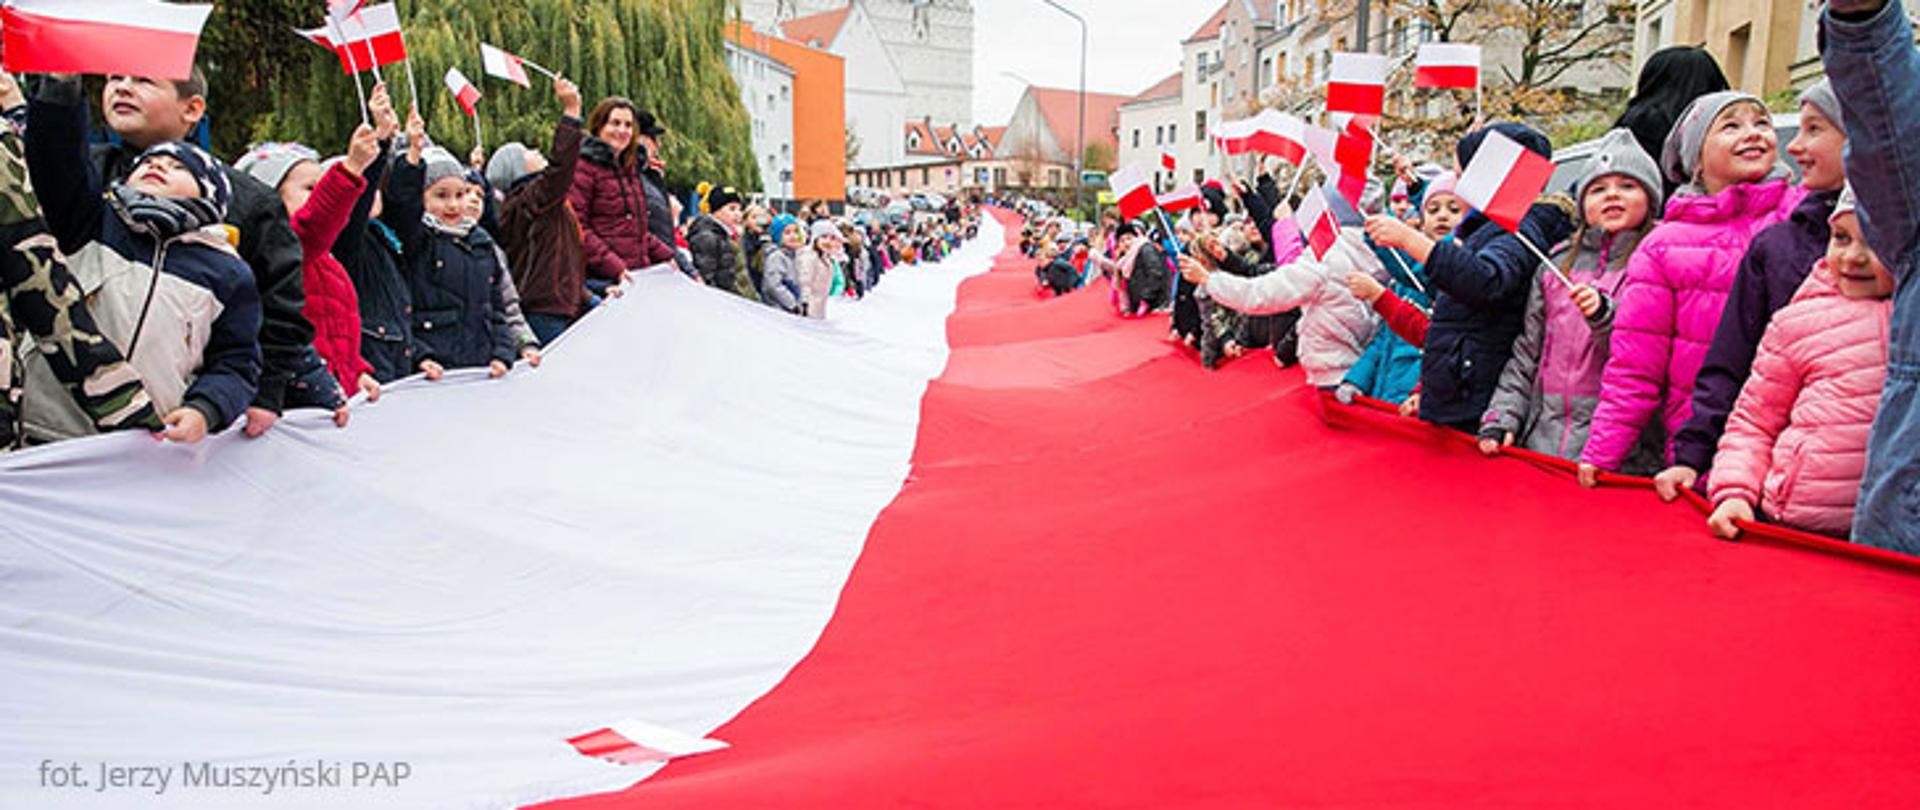 The Day of Polish Community and Poles Abroad was established in recognition of the historical contribution of diaspora communities to the national objectives of the country of their forefathers. Celebrated jointly with Polish Flag Day, it is intended to encourage Poles to reflect on the glorious pages of the country’s past.